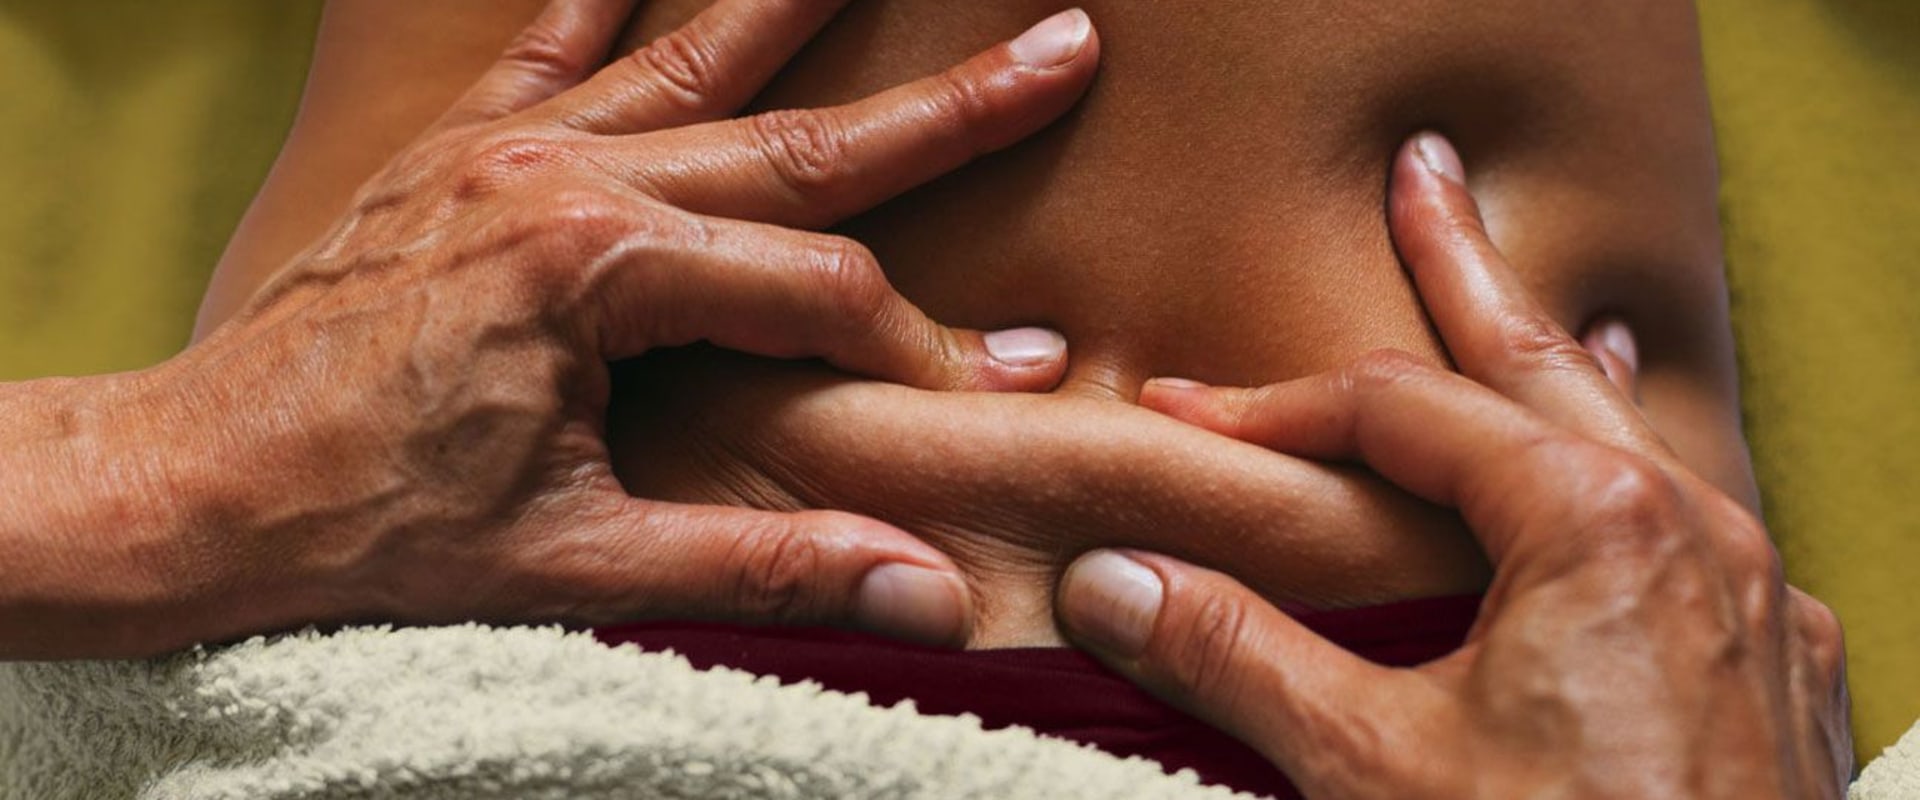 What is a deep tissue massage good for?